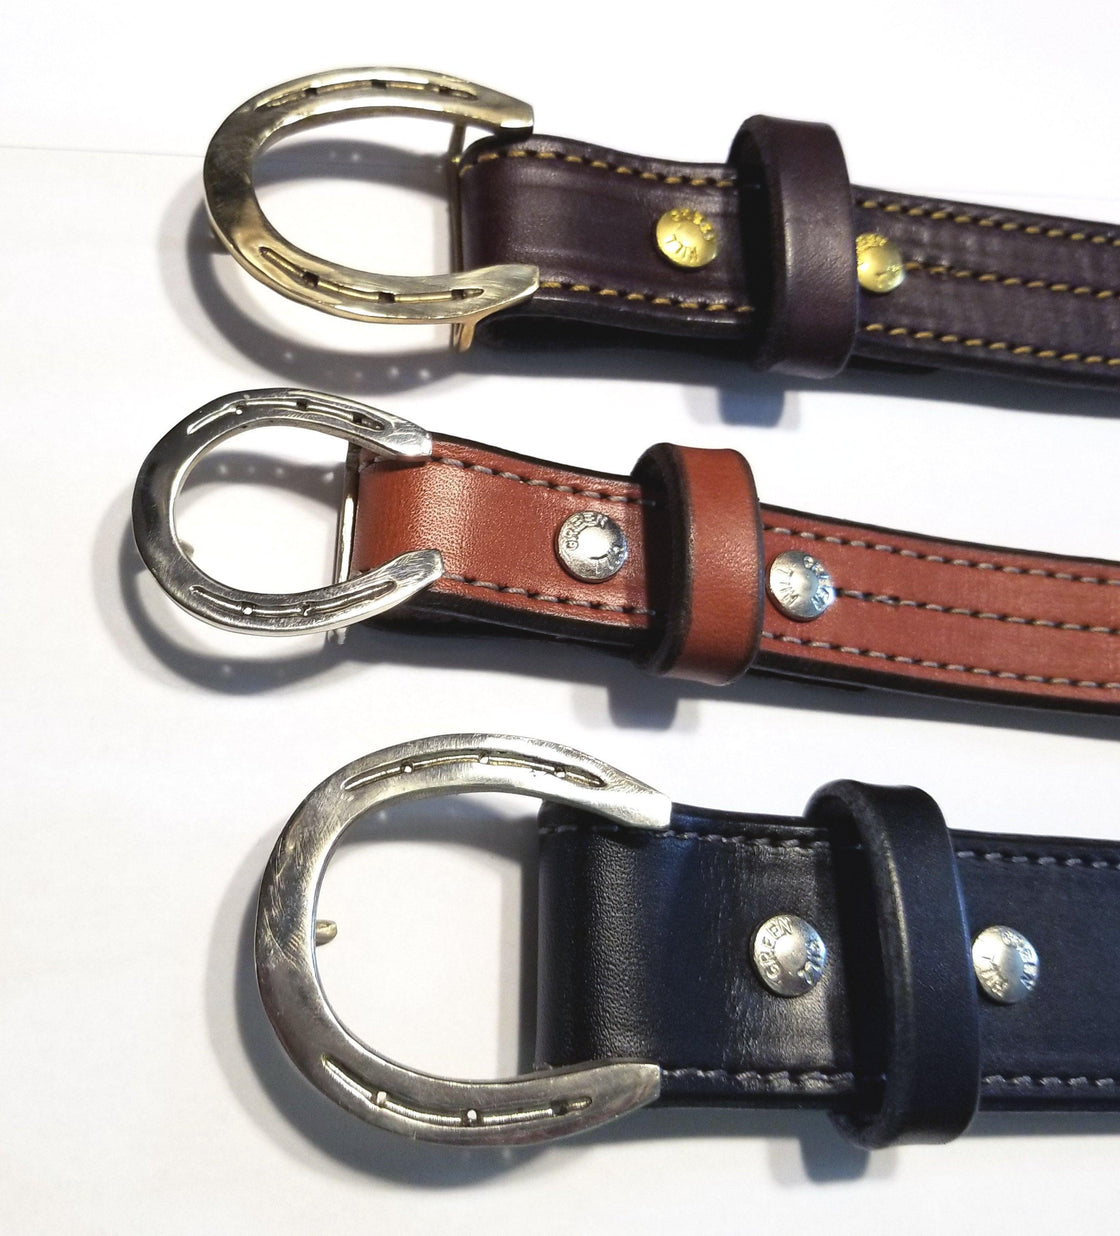 Bridle Leather Belts with stitching 1.25 inch width - Tempi Design Studio